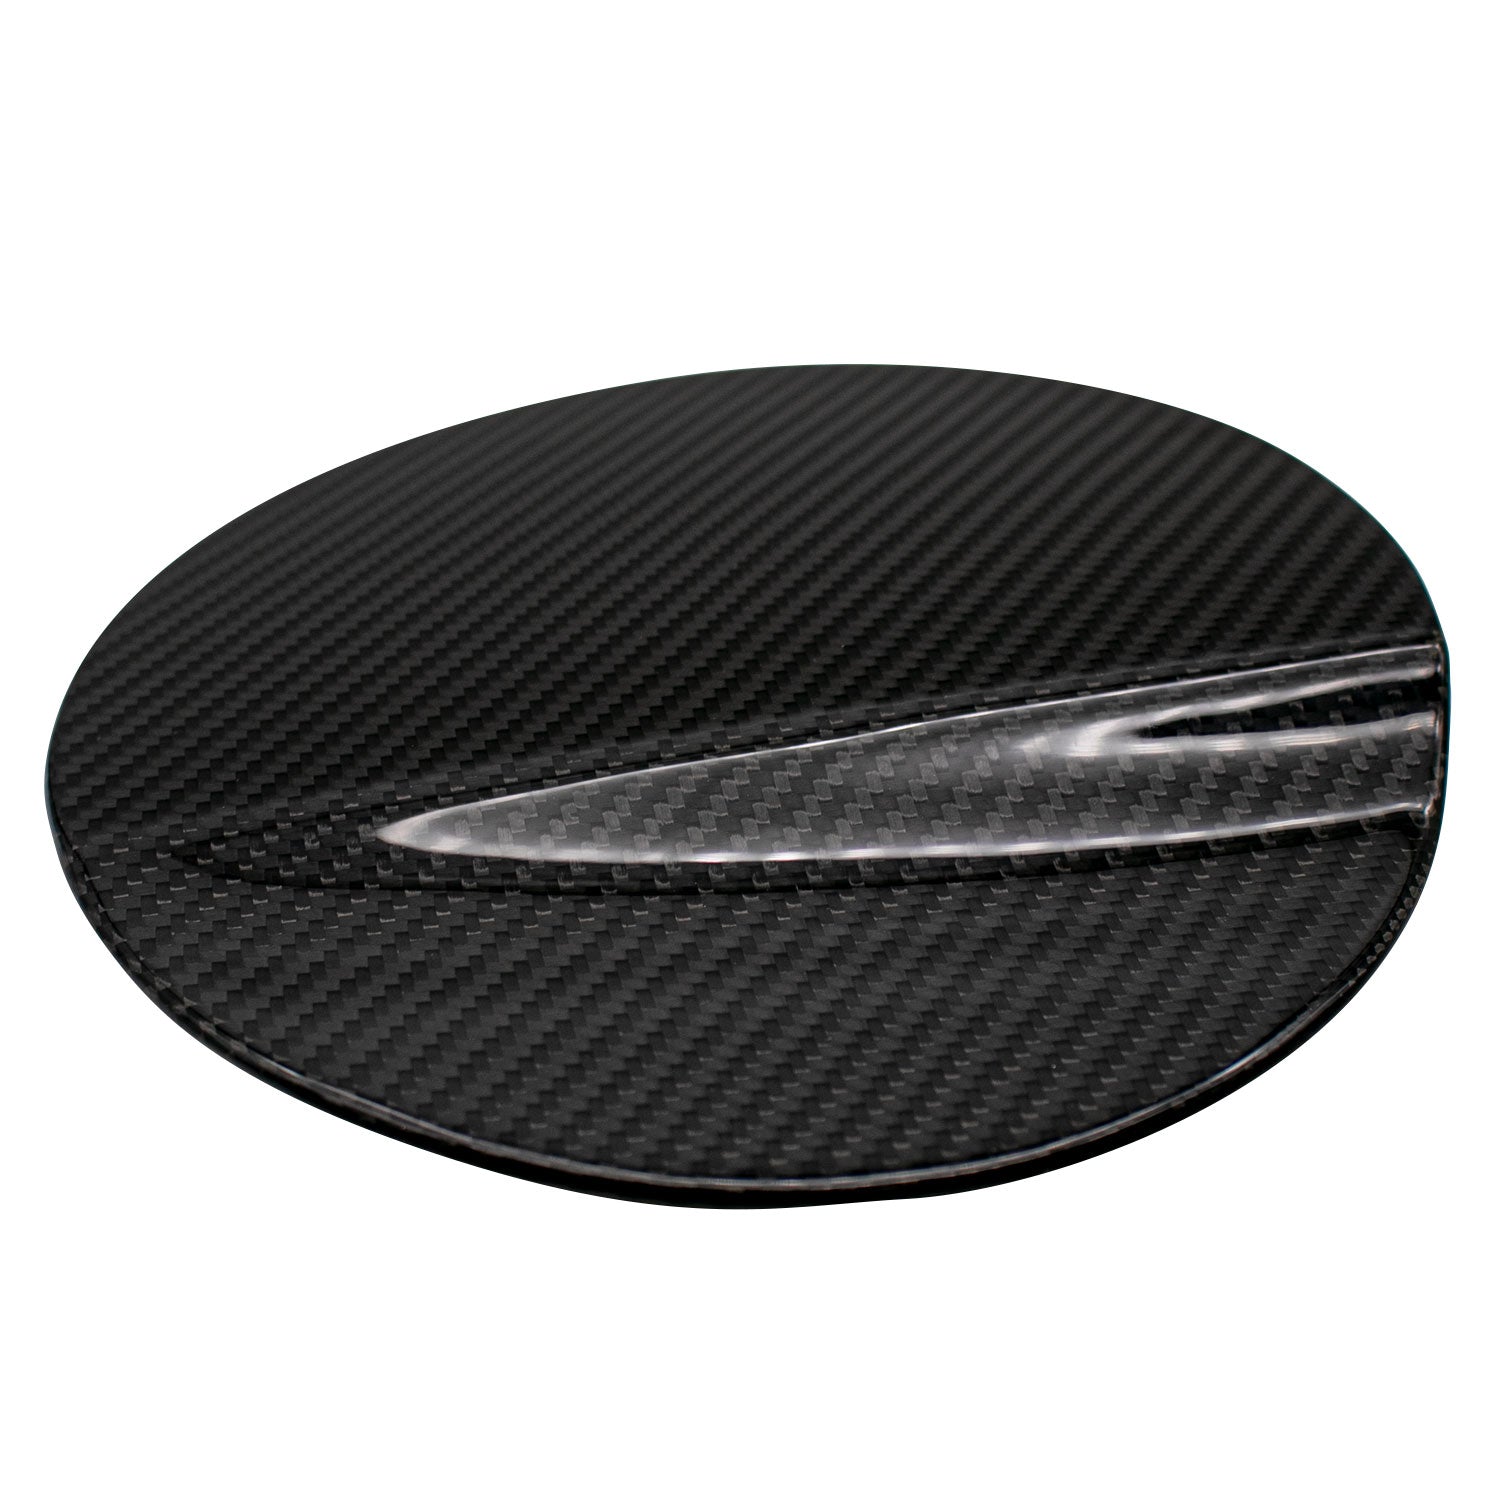 2015-2020 Ford Mustang - Real Carbon Fiber Gas Tank Cover